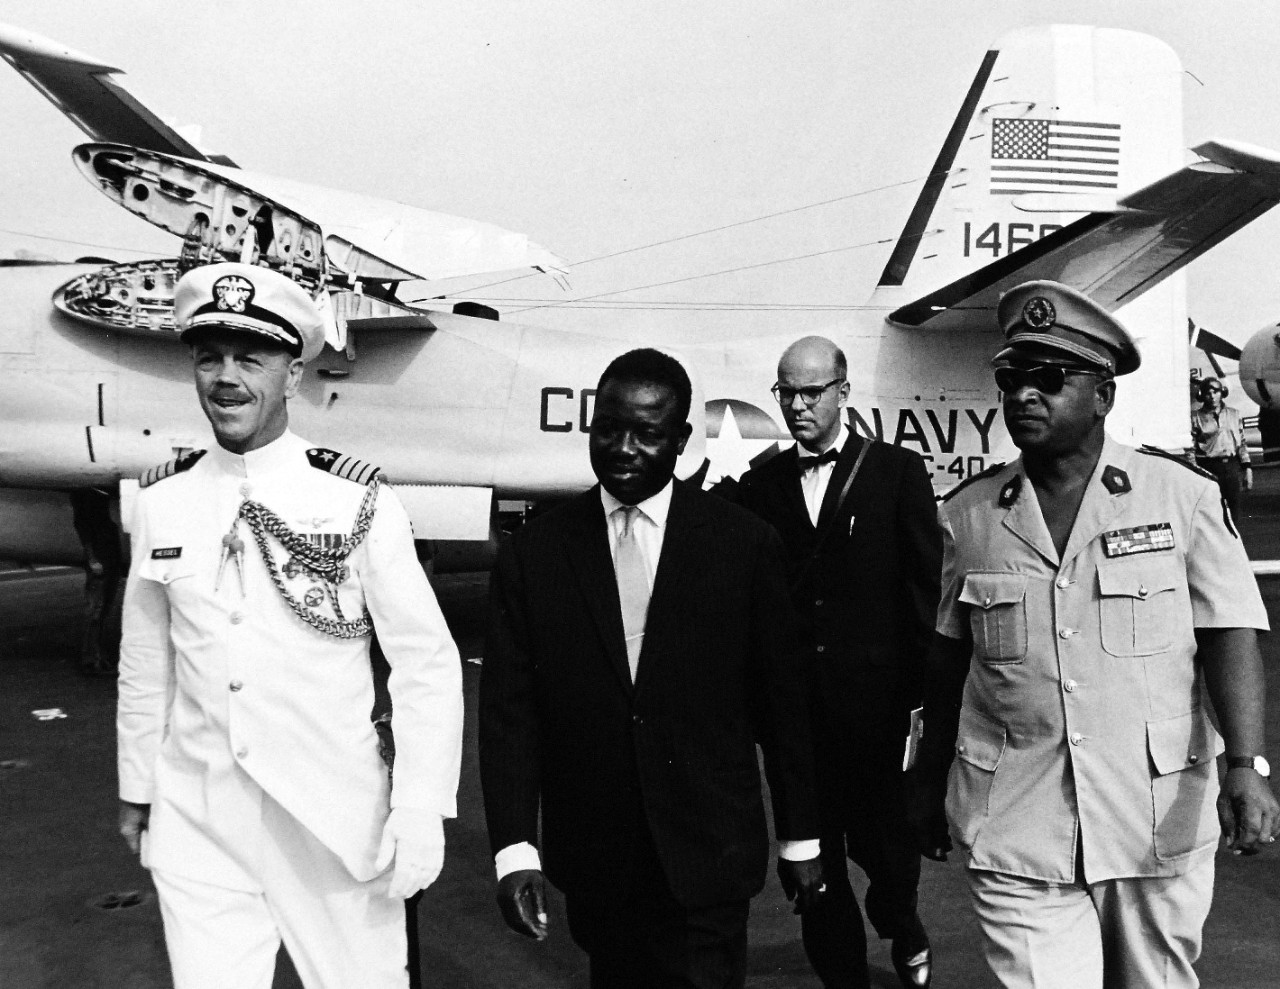 330-PSA-178-64 (USN 11042204):  Operation Sea Orbit, 1964.   Officials at Dakar, Senegal, were flown to USS Enterprise for an air demonstration as the nuclear task force sailed down the coast of Africa in the first phase of the global cruise.  Captain E.W. Hassel, Chief of Staff for the Commander of the Task Force escorts Senegalese cabinet officials.   Master caption:  Operation Sea Orbit has completed the first three weeks of its round-the-world cruise proving conclusively the feasibility of operation nuclear surface ships over great distances on a self-sustaining basis.  Sea Orbit is the first world cruise of the surface nuclear ships.  The task force is made-up of USS Enterprise (CVN-65), USS Long Beach (CLGN-9), and USS Bainbridge (DLGN-25).   The world cruise has a dual mission.  It offers practical experience in operation of nuclear-powered warships independent of support ships, a fast impractical for conventionally powers ships.  Equally important, and immediately evident is the opportunity to win friends in areas not frequently visited by U.S. Navy ships, and to show the world an all nuclear element of the world’s greats power for peace.  Two other world circumnavigations were made by U.S. nuclear vessels, both submarines.  Photograph released August 22, 1964.  Official U.S. Navy Photograph, now in the collections of the National Archives.   (2015/11/03).